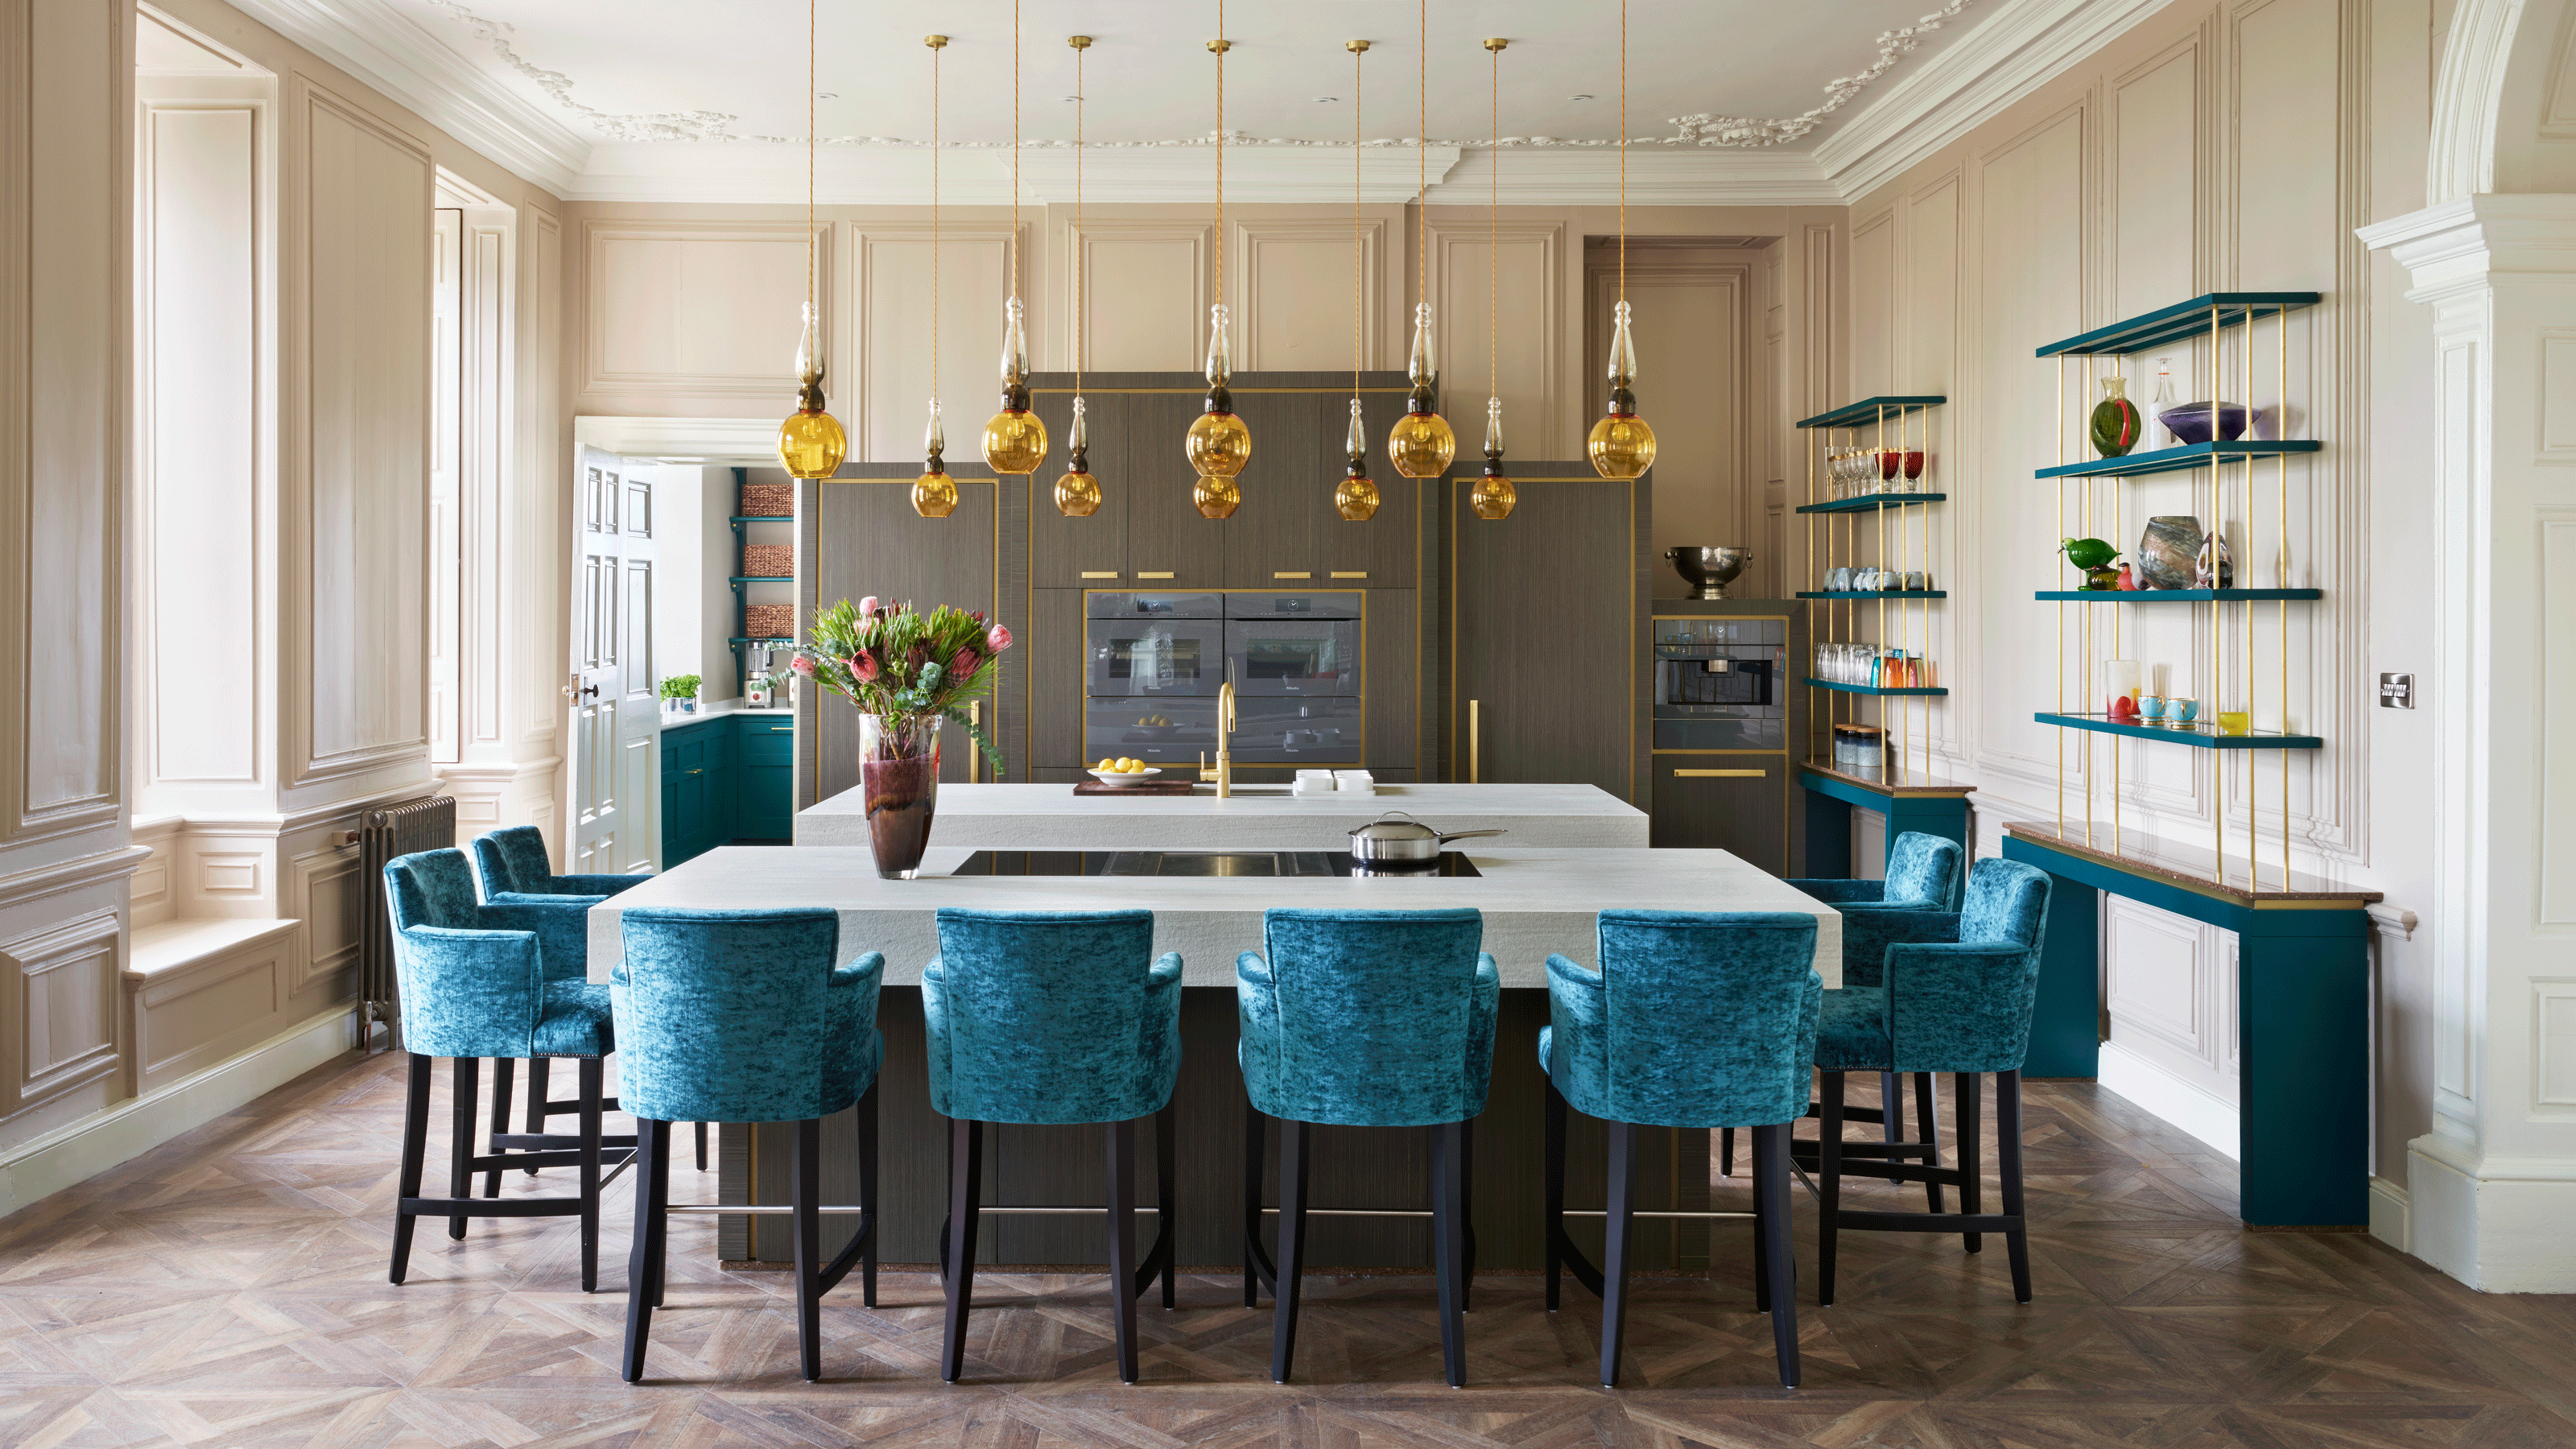 18 style lessons from the glam kitchen of a 18 year old home ...